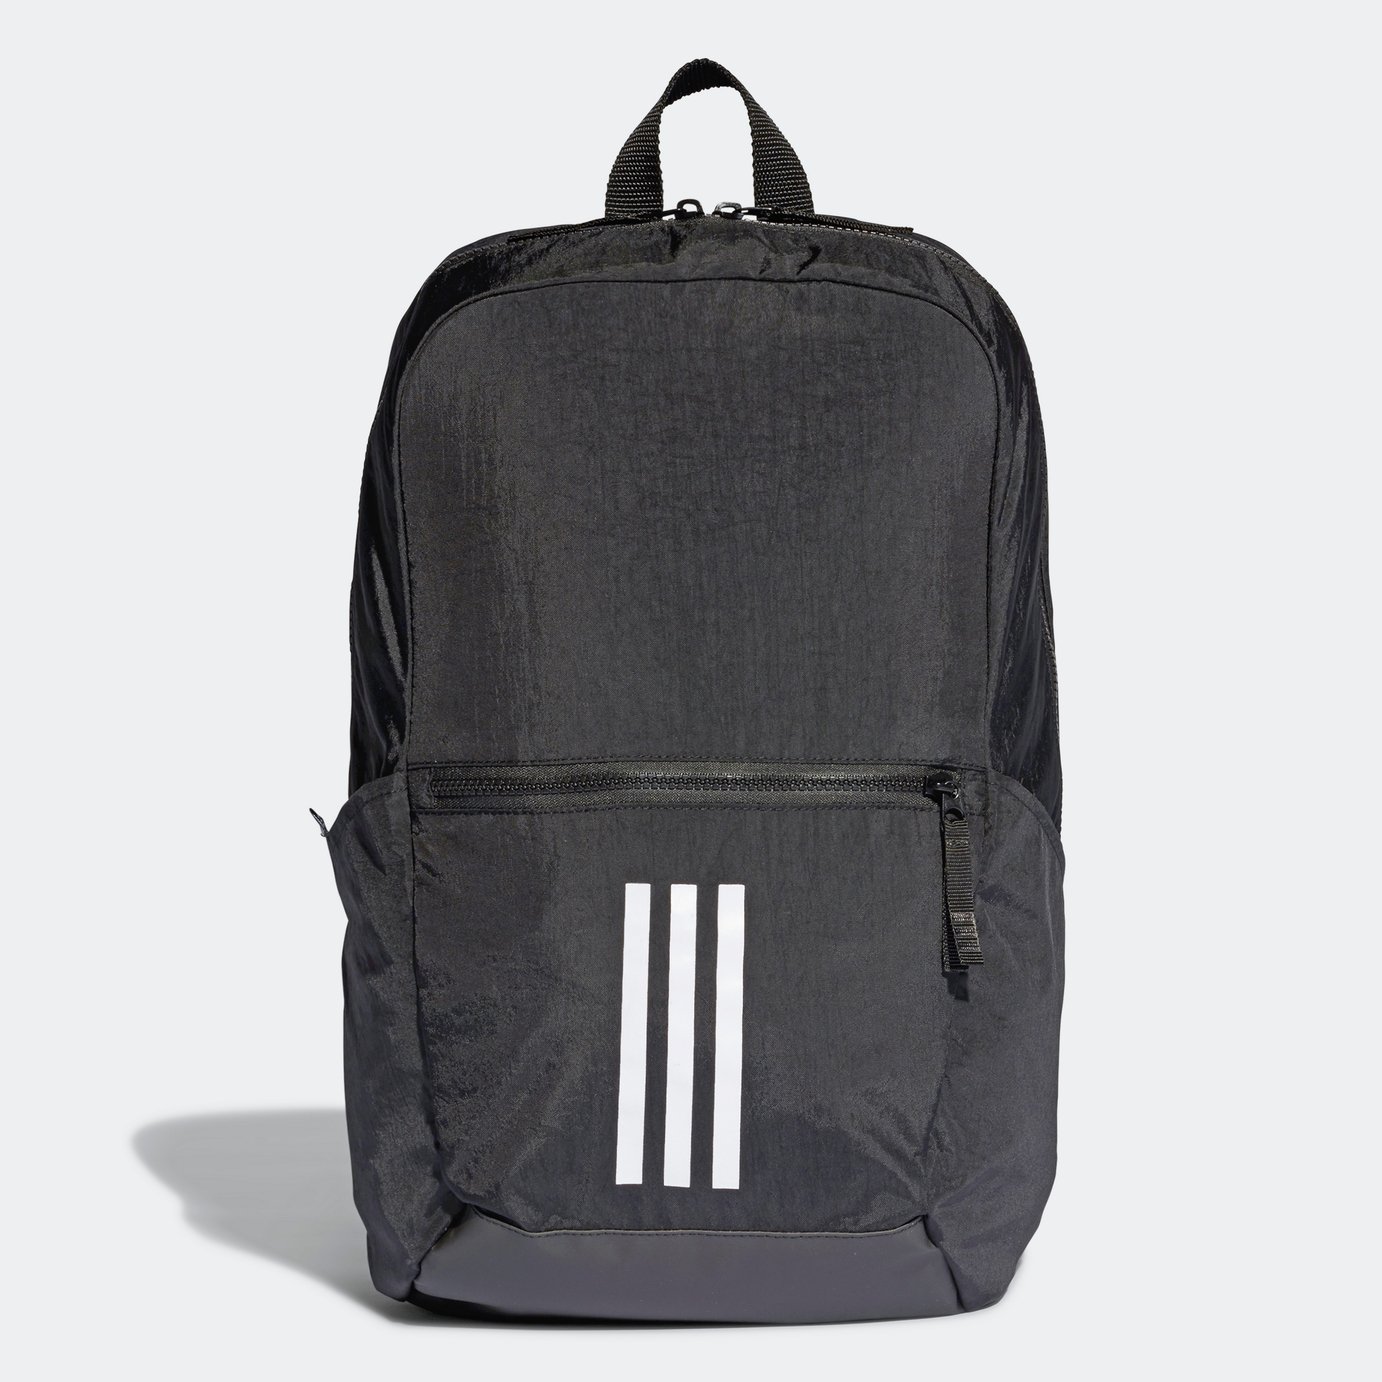 Adidas Parkhood 25.5L Backpack - Black and White (8876281) | Argos ...